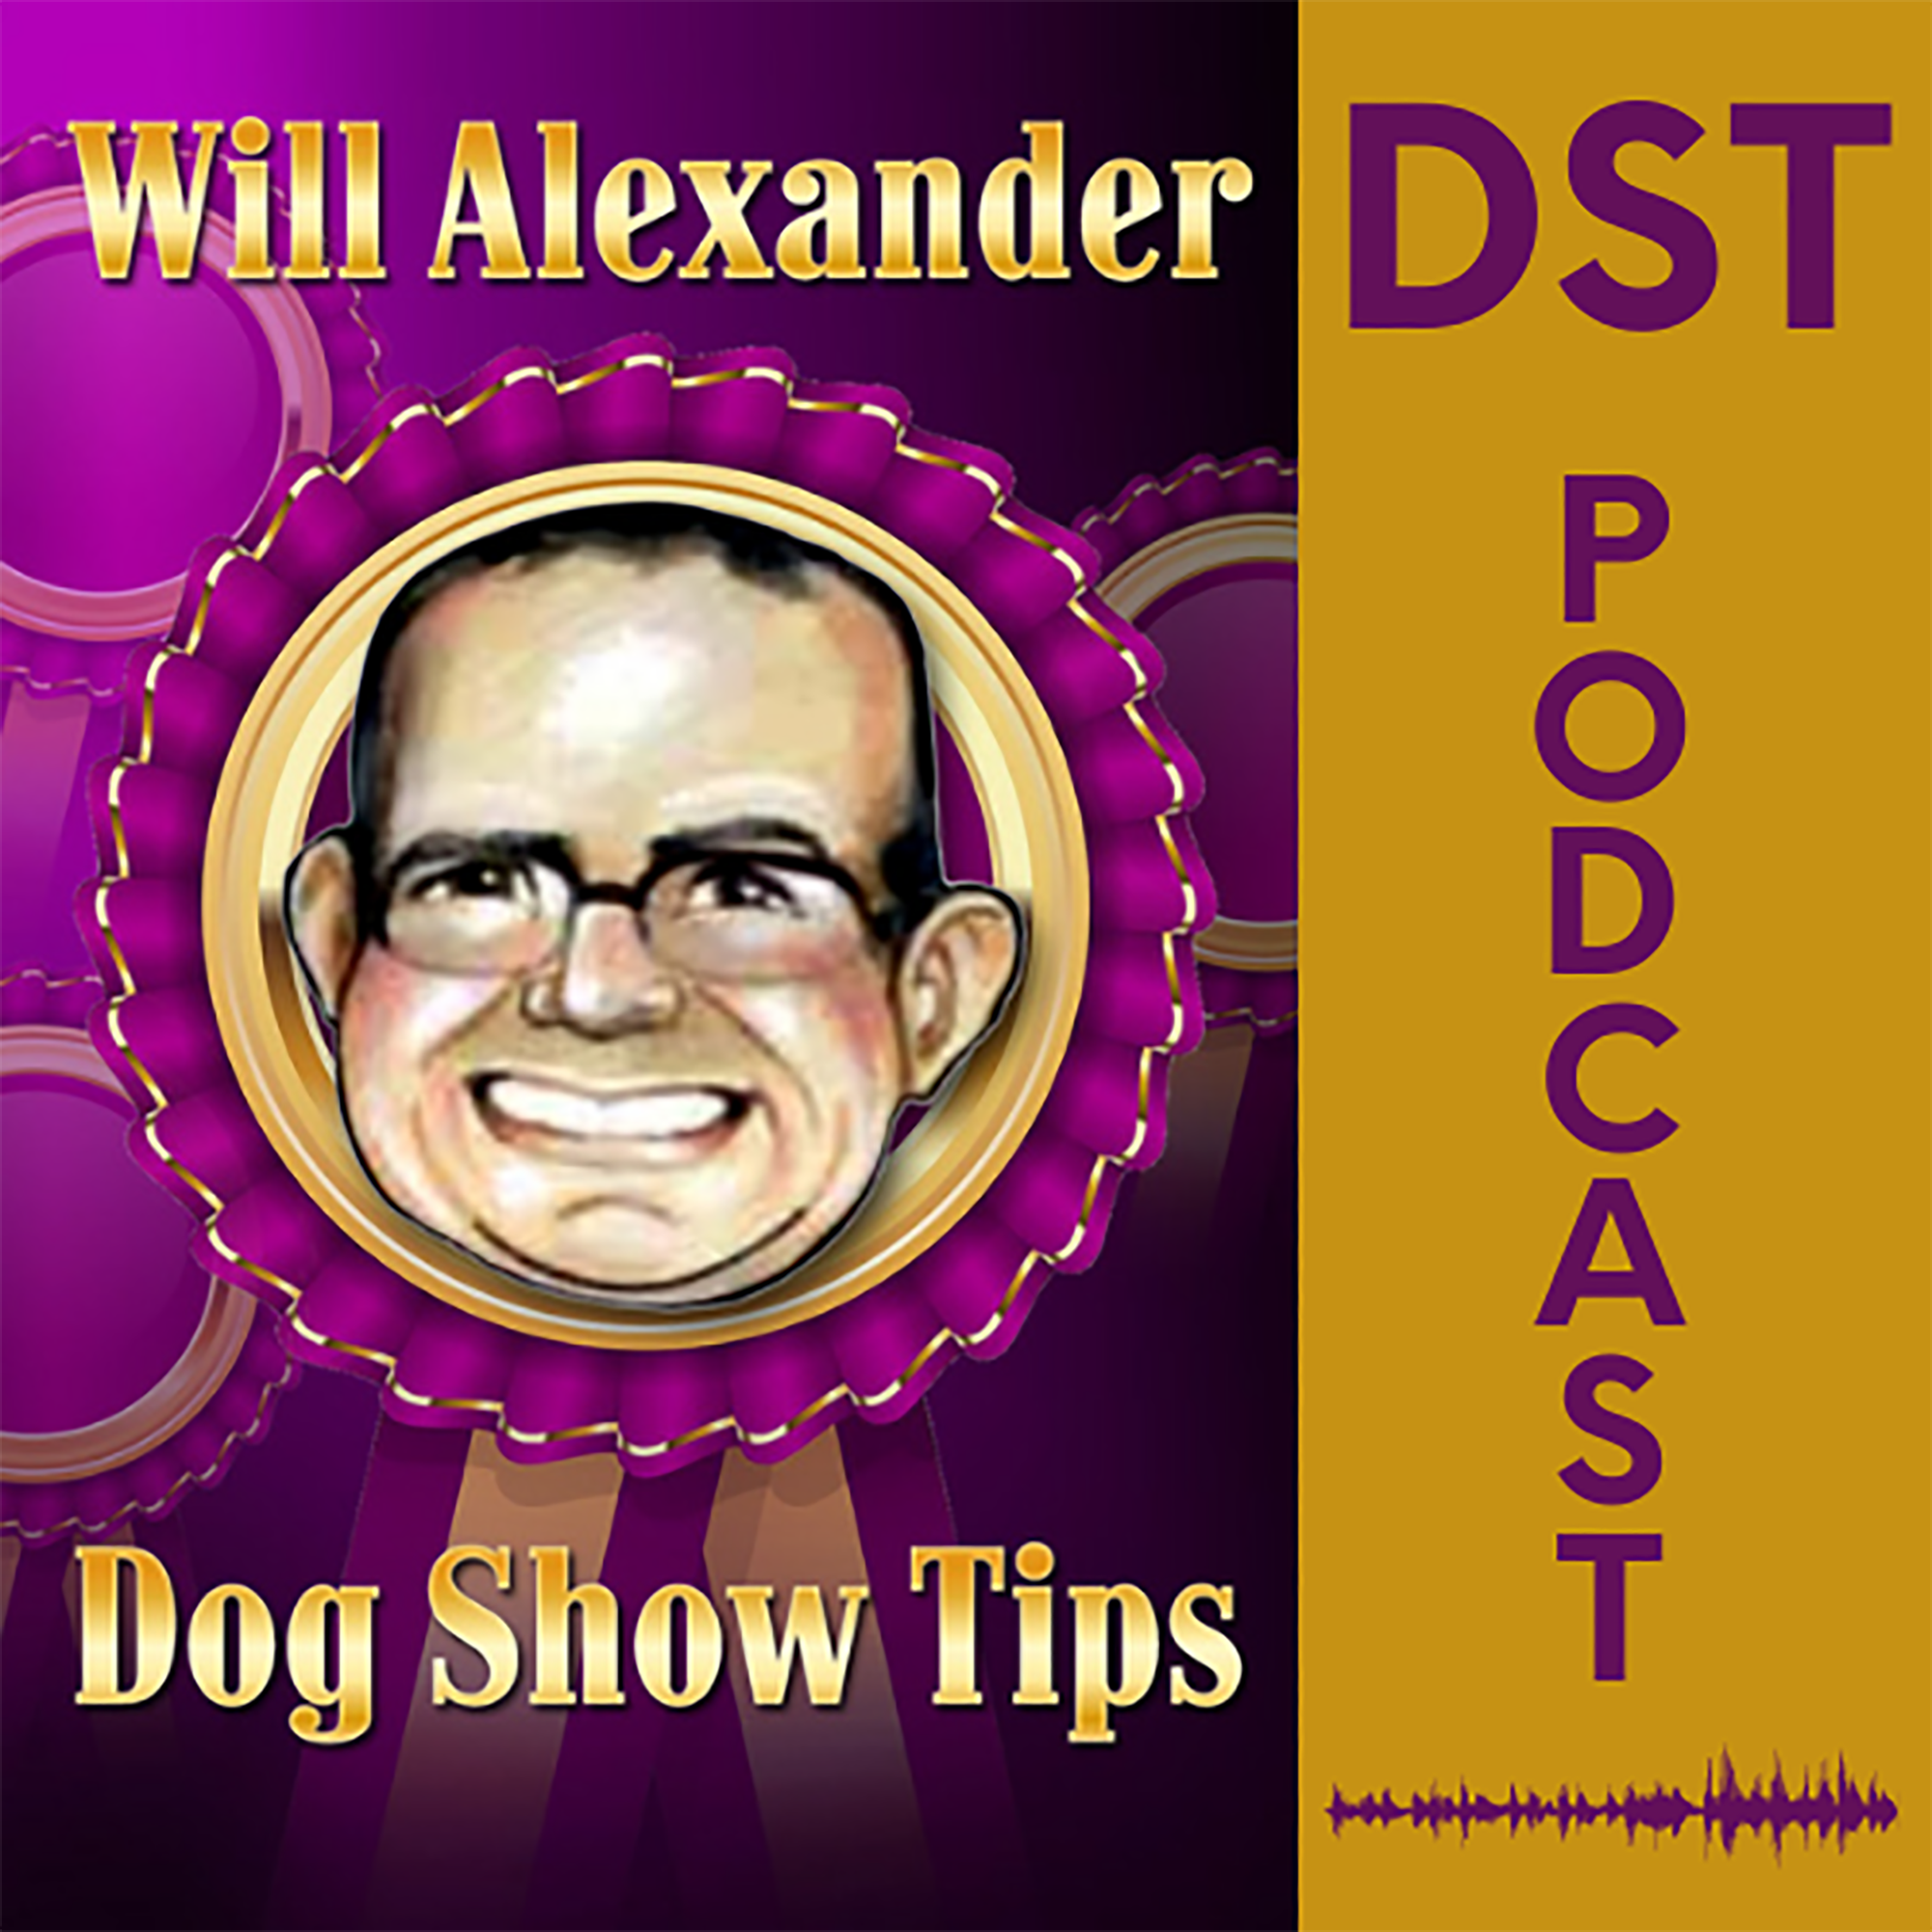 Dog Show Tips,  Doug Carlson interviewed by Will Alexander